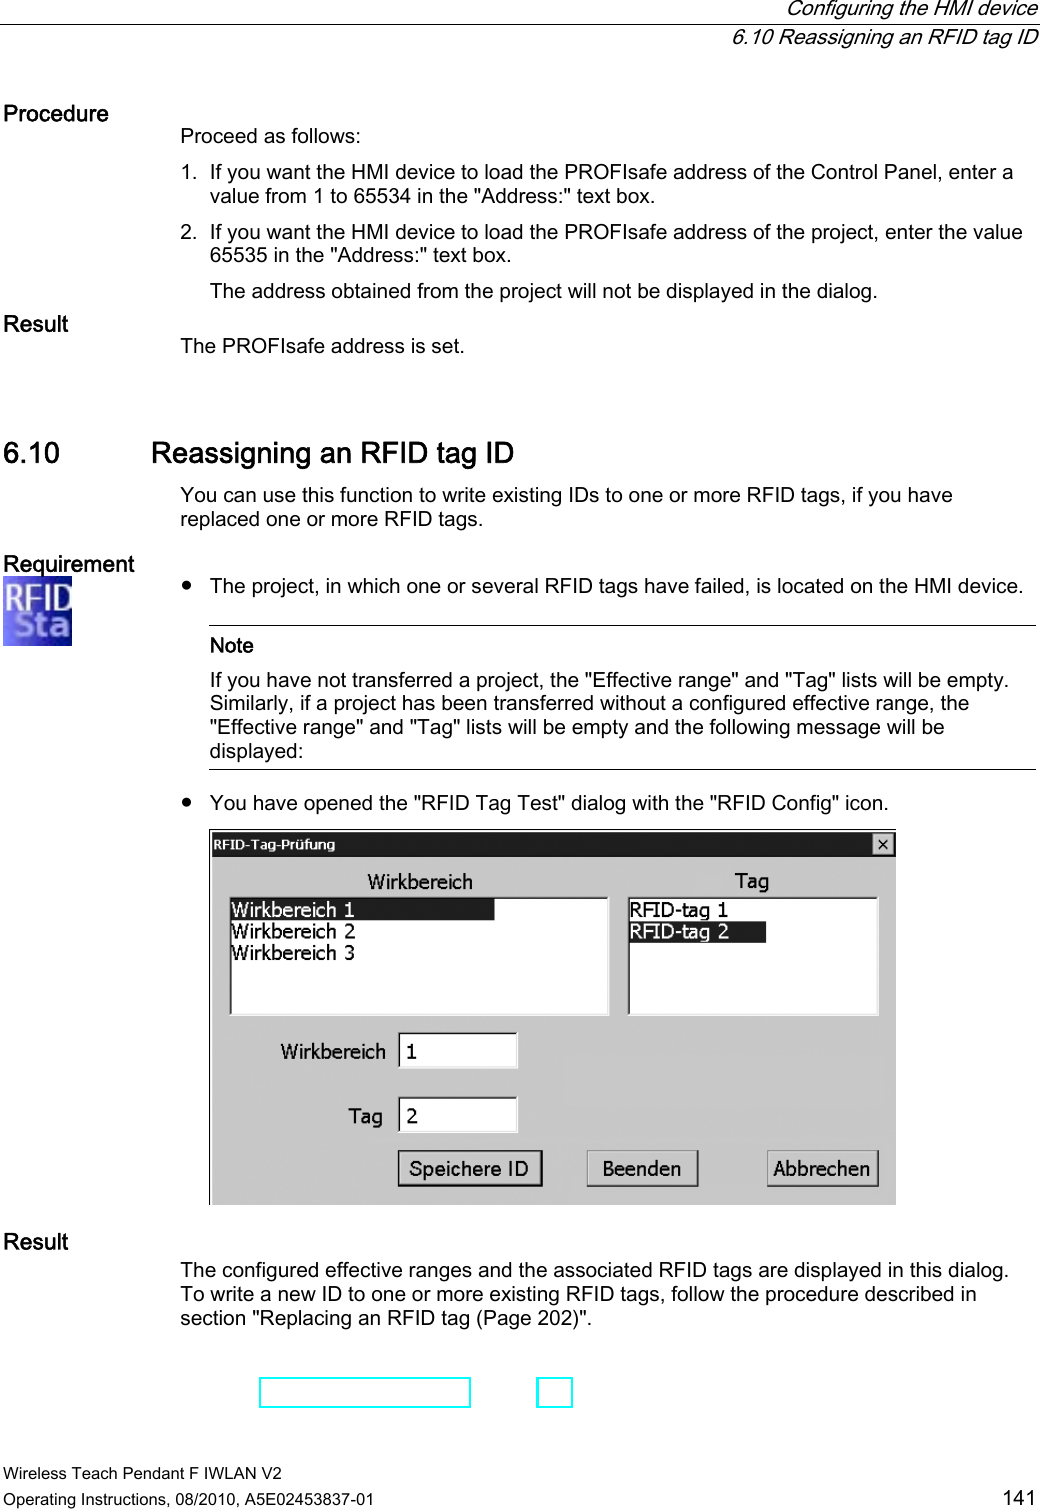  Configuring the HMI device  6.10 Reassigning an RFID tag ID Wireless Teach Pendant F IWLAN V2 Operating Instructions, 08/2010, A5E02453837-01  141 Procedure Proceed as follows: 1. If you want the HMI device to load the PROFIsafe address of the Control Panel, enter a value from 1 to 65534 in the &quot;Address:&quot; text box. 2. If you want the HMI device to load the PROFIsafe address of the project, enter the value 65535 in the &quot;Address:&quot; text box. The address obtained from the project will not be displayed in the dialog. Result The PROFIsafe address is set. 6.10 Reassigning an RFID tag ID You can use this function to write existing IDs to one or more RFID tags, if you have replaced one or more RFID tags. Requirement  ●  The project, in which one or several RFID tags have failed, is located on the HMI device.    Note If you have not transferred a project, the &quot;Effective range&quot; and &quot;Tag&quot; lists will be empty. Similarly, if a project has been transferred without a configured effective range, the &quot;Effective range&quot; and &quot;Tag&quot; lists will be empty and the following message will be displayed:  ●  You have opened the &quot;RFID Tag Test&quot; dialog with the &quot;RFID Config&quot; icon.  Result The configured effective ranges and the associated RFID tags are displayed in this dialog. To write a new ID to one or more existing RFID tags, follow the procedure described in section &quot;Replacing an RFID tag (Page 202)&quot;. PRELIMINARY II 1.7.2010